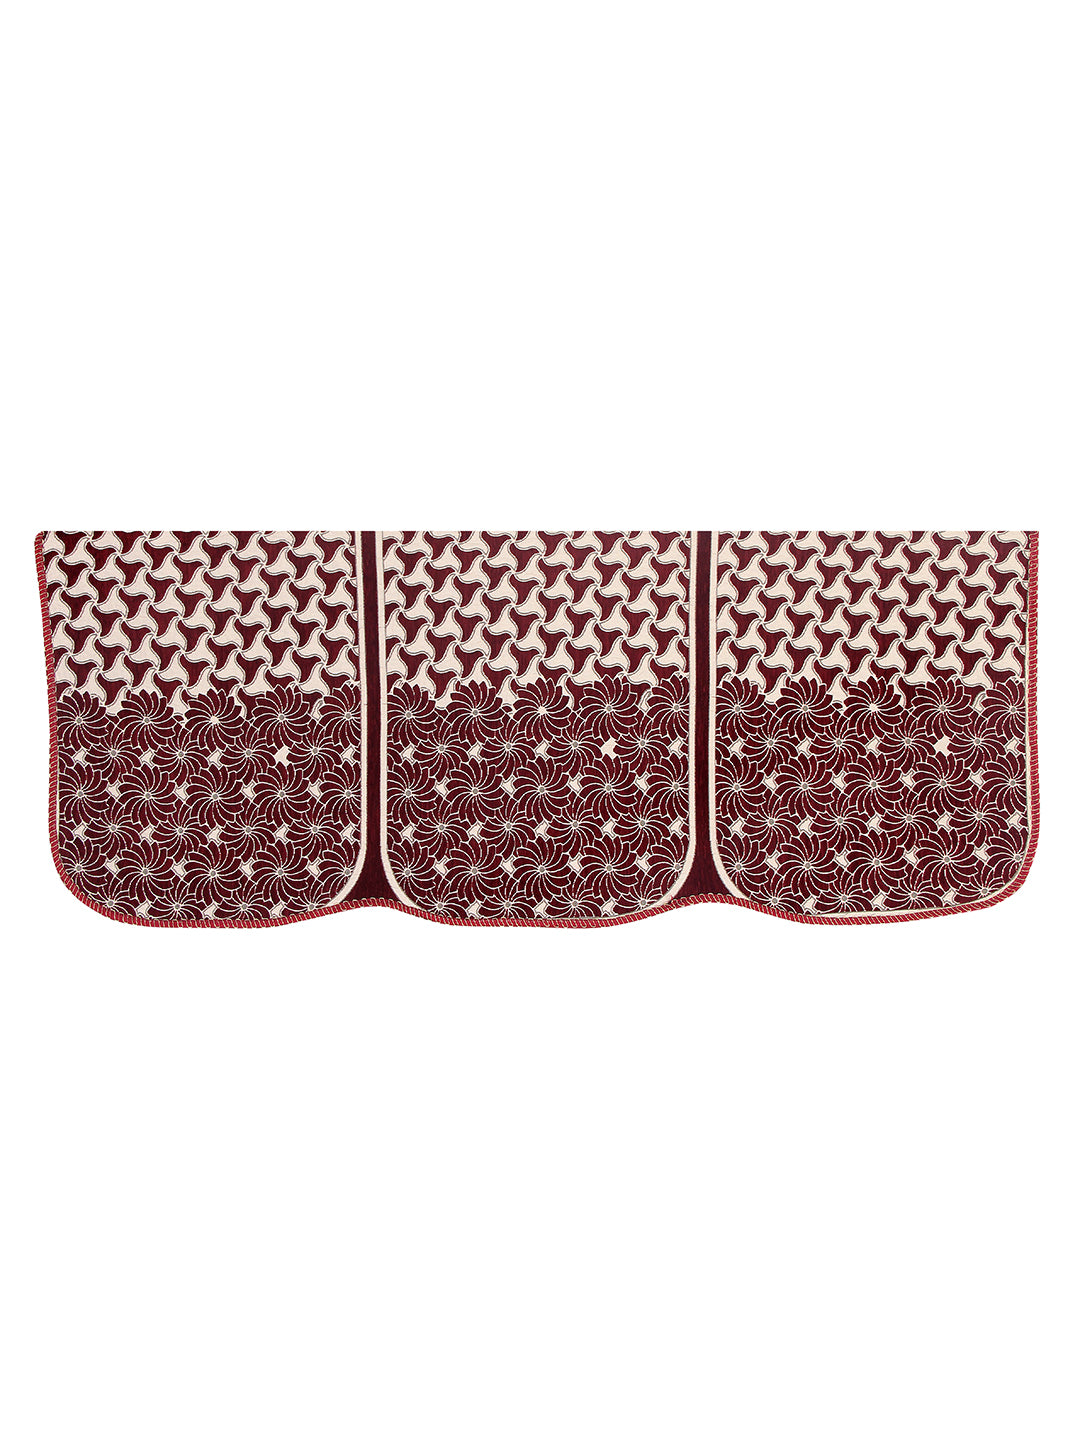 Floral Design Sofa Cover 5 Seater, (6 Pieces) - Maroon